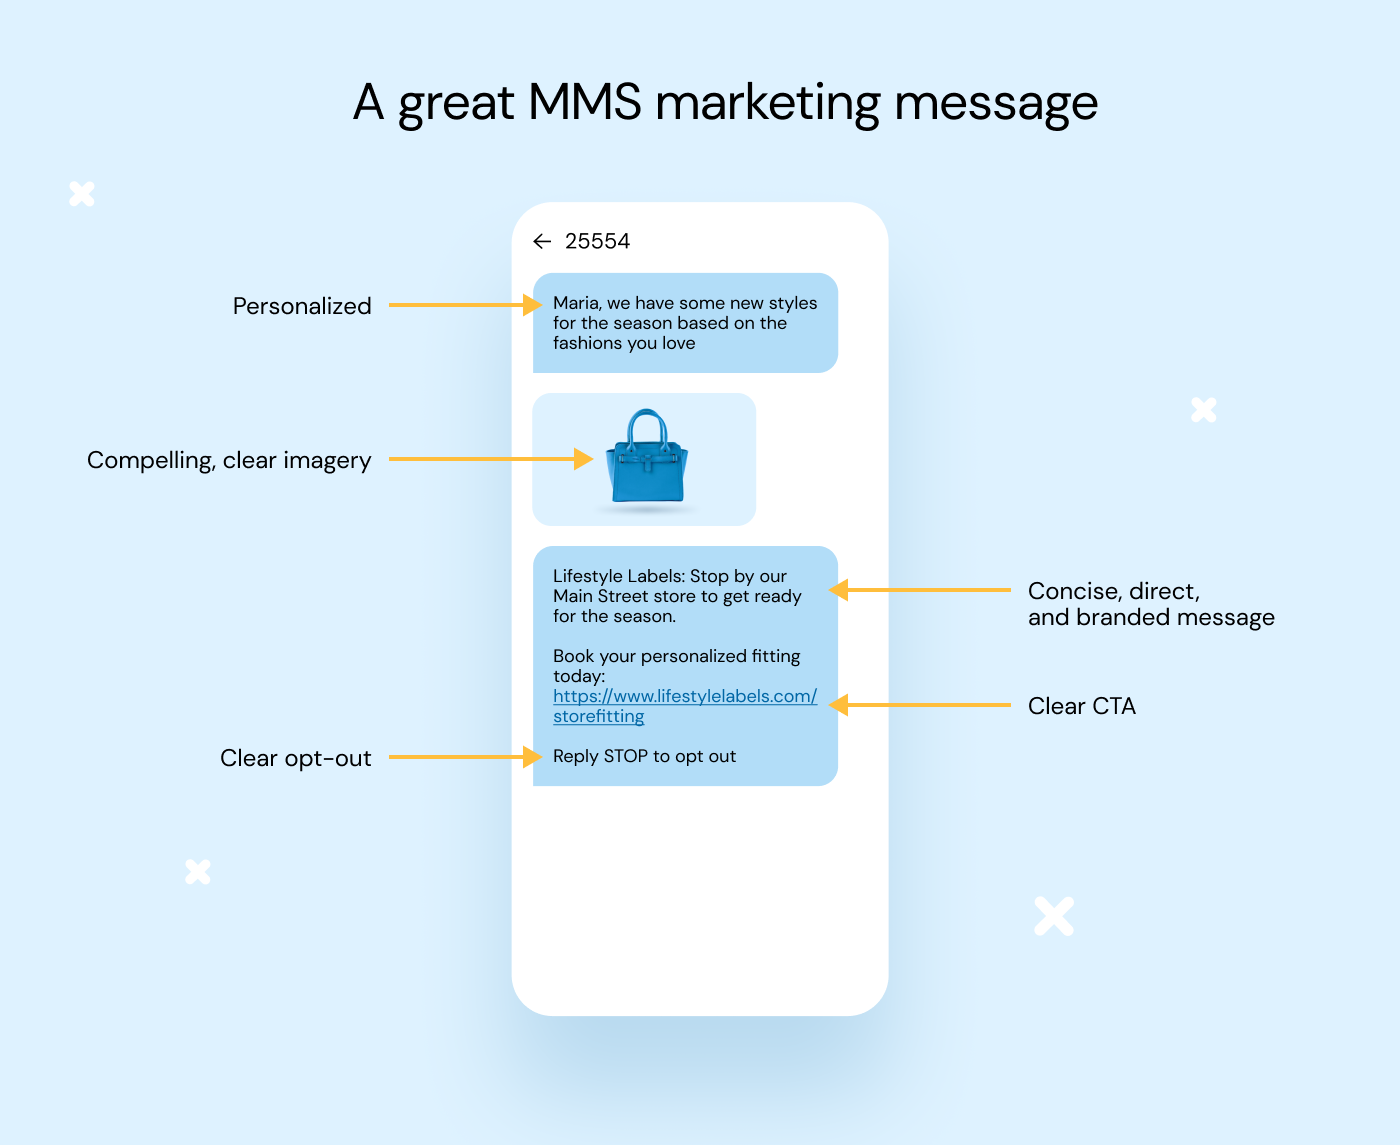 A great MMS marketing message example